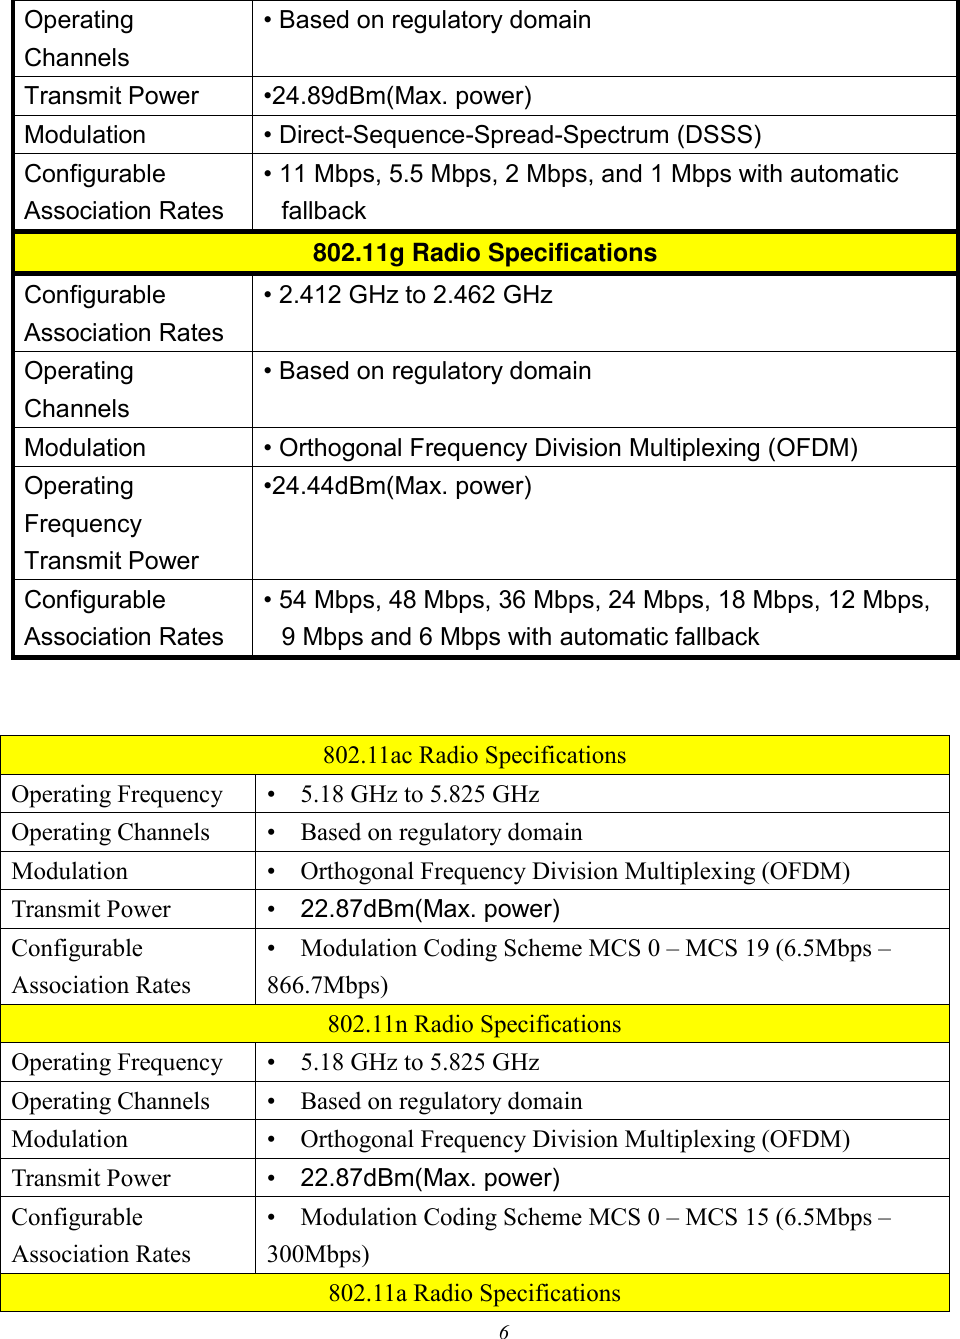 6   Operating Channels • Based on regulatory domain Transmit Power •24.89dBm(Max. power) Modulation • Direct-Sequence-Spread-Spectrum (DSSS) Configurable Association Rates • 11 Mbps, 5.5 Mbps, 2 Mbps, and 1 Mbps with automatic fallback 802.11g Radio Specifications Configurable Association Rates • 2.412 GHz to 2.462 GHz Operating Channels • Based on regulatory domain Modulation • Orthogonal Frequency Division Multiplexing (OFDM) Operating Frequency Transmit Power •24.44dBm(Max. power) Configurable Association Rates • 54 Mbps, 48 Mbps, 36 Mbps, 24 Mbps, 18 Mbps, 12 Mbps, 9 Mbps and 6 Mbps with automatic fallback   802.11ac Radio Specifications Operating Frequency   •    5.18 GHz to 5.825 GHz Operating Channels   •    Based on regulatory domain Modulation   •    Orthogonal Frequency Division Multiplexing (OFDM) Transmit Power   •    22.87dBm(Max. power) Configurable Association Rates   •    Modulation Coding Scheme MCS 0 – MCS 19 (6.5Mbps – 866.7Mbps) 802.11n Radio Specifications Operating Frequency   •    5.18 GHz to 5.825 GHz Operating Channels   •    Based on regulatory domain Modulation   •    Orthogonal Frequency Division Multiplexing (OFDM) Transmit Power   •    22.87dBm(Max. power) Configurable Association Rates   •    Modulation Coding Scheme MCS 0 – MCS 15 (6.5Mbps – 300Mbps) 802.11a Radio Specifications 